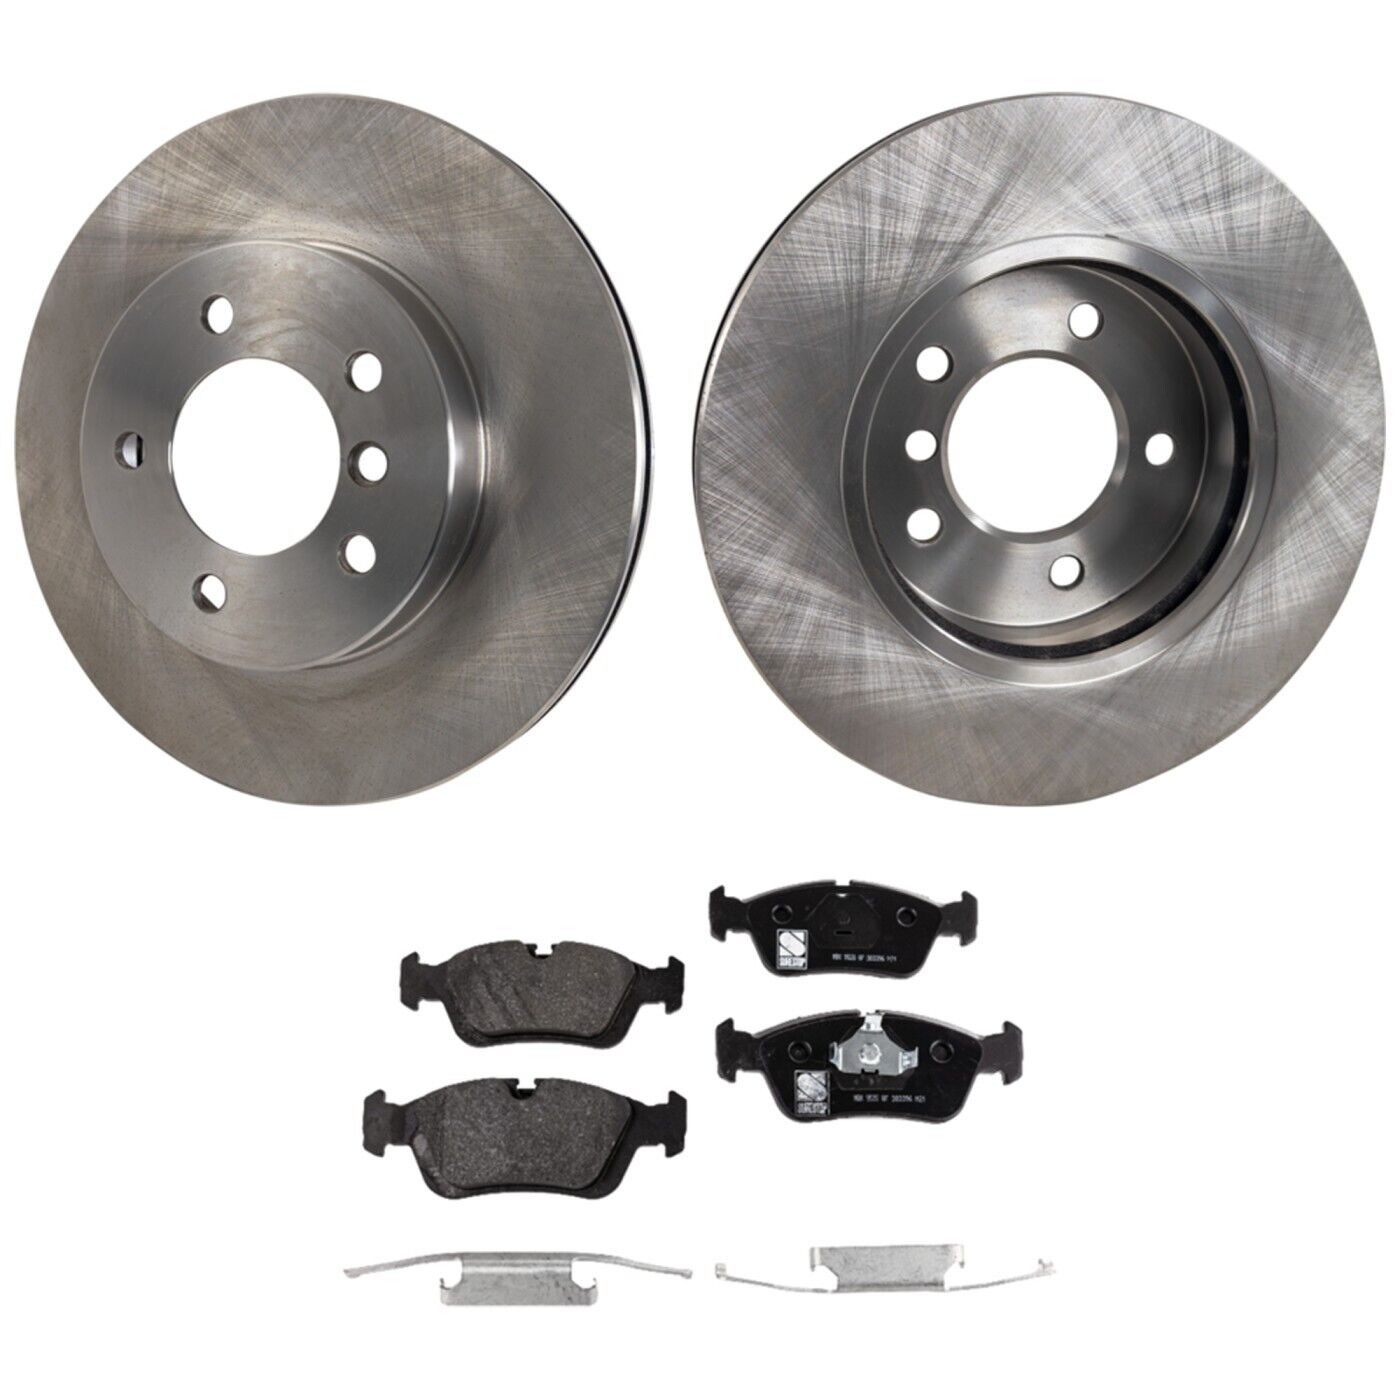 Front Brake Disc Rotors and Pads Kit for 323 325 328 E46 3 Series BMW 328i E90